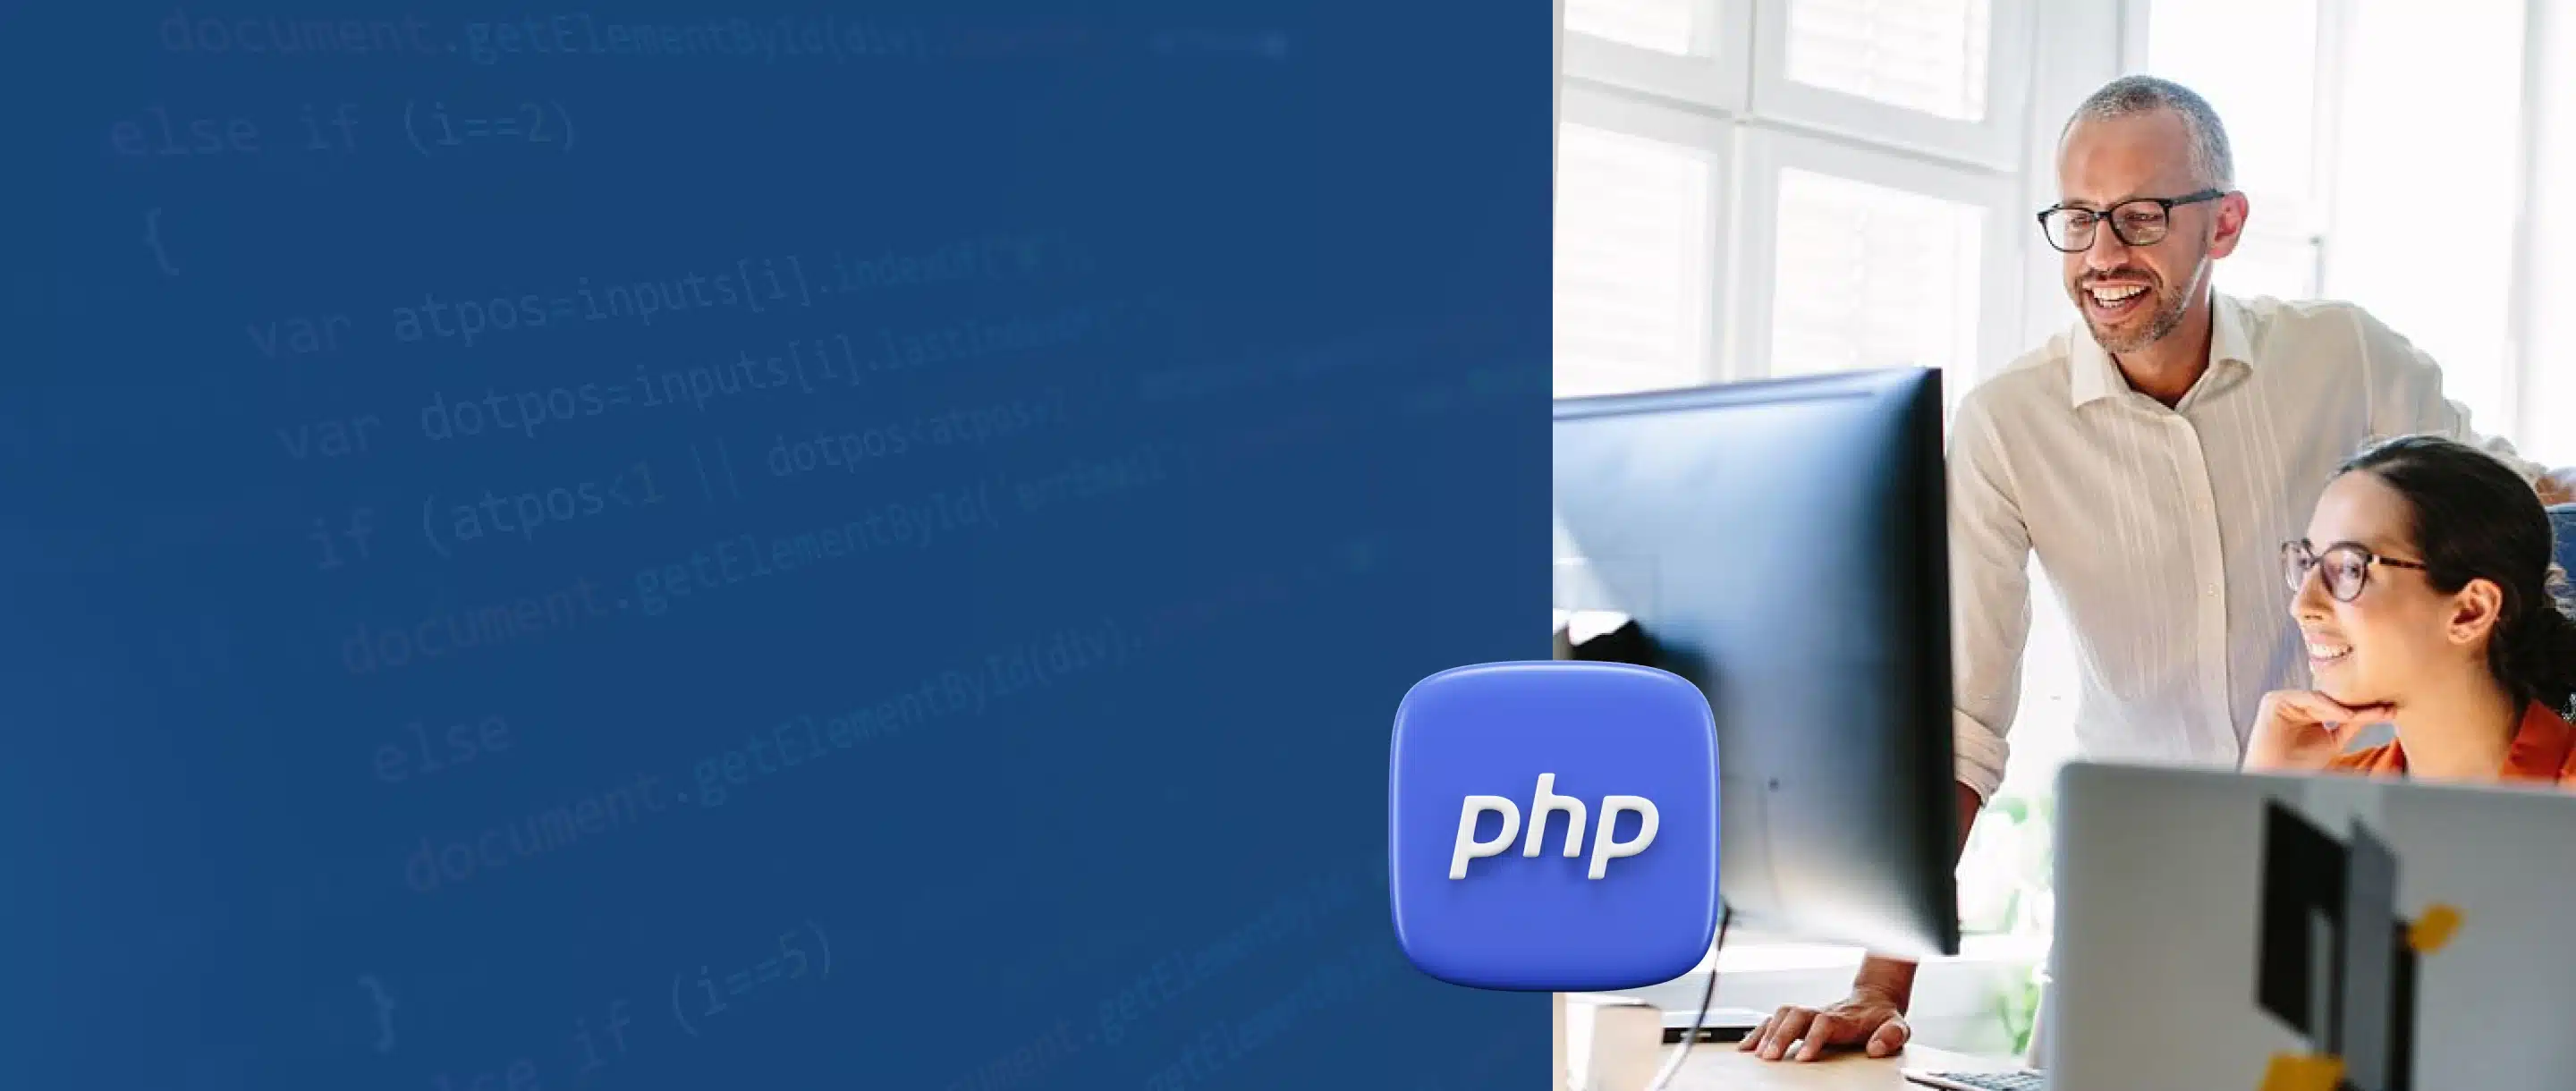 PHP developers